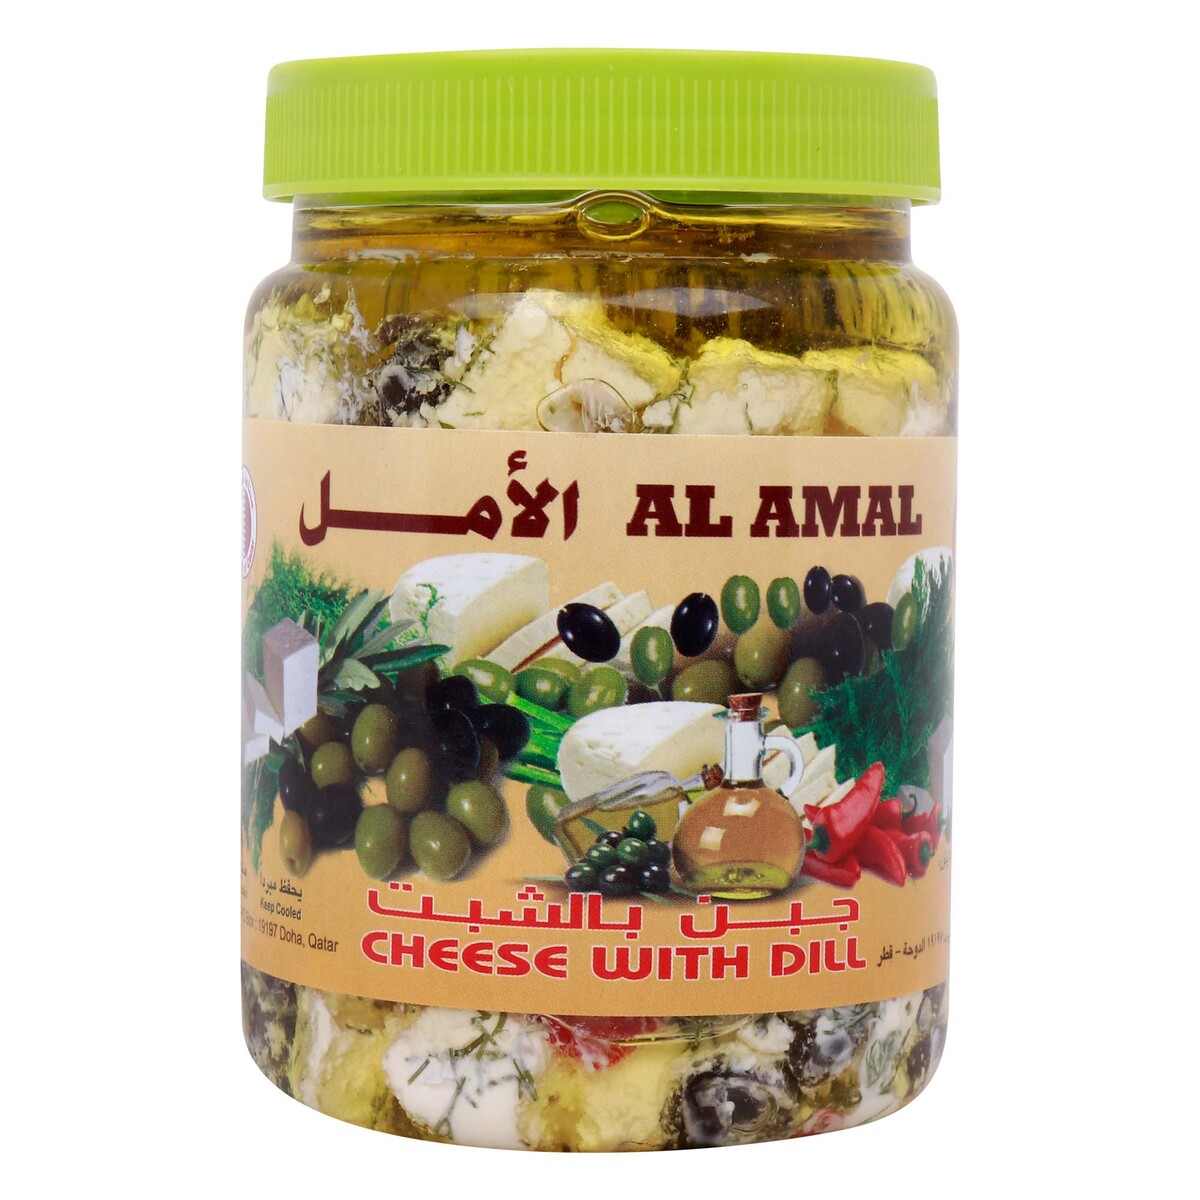 Al Amal Cheese with Dill, 500 g